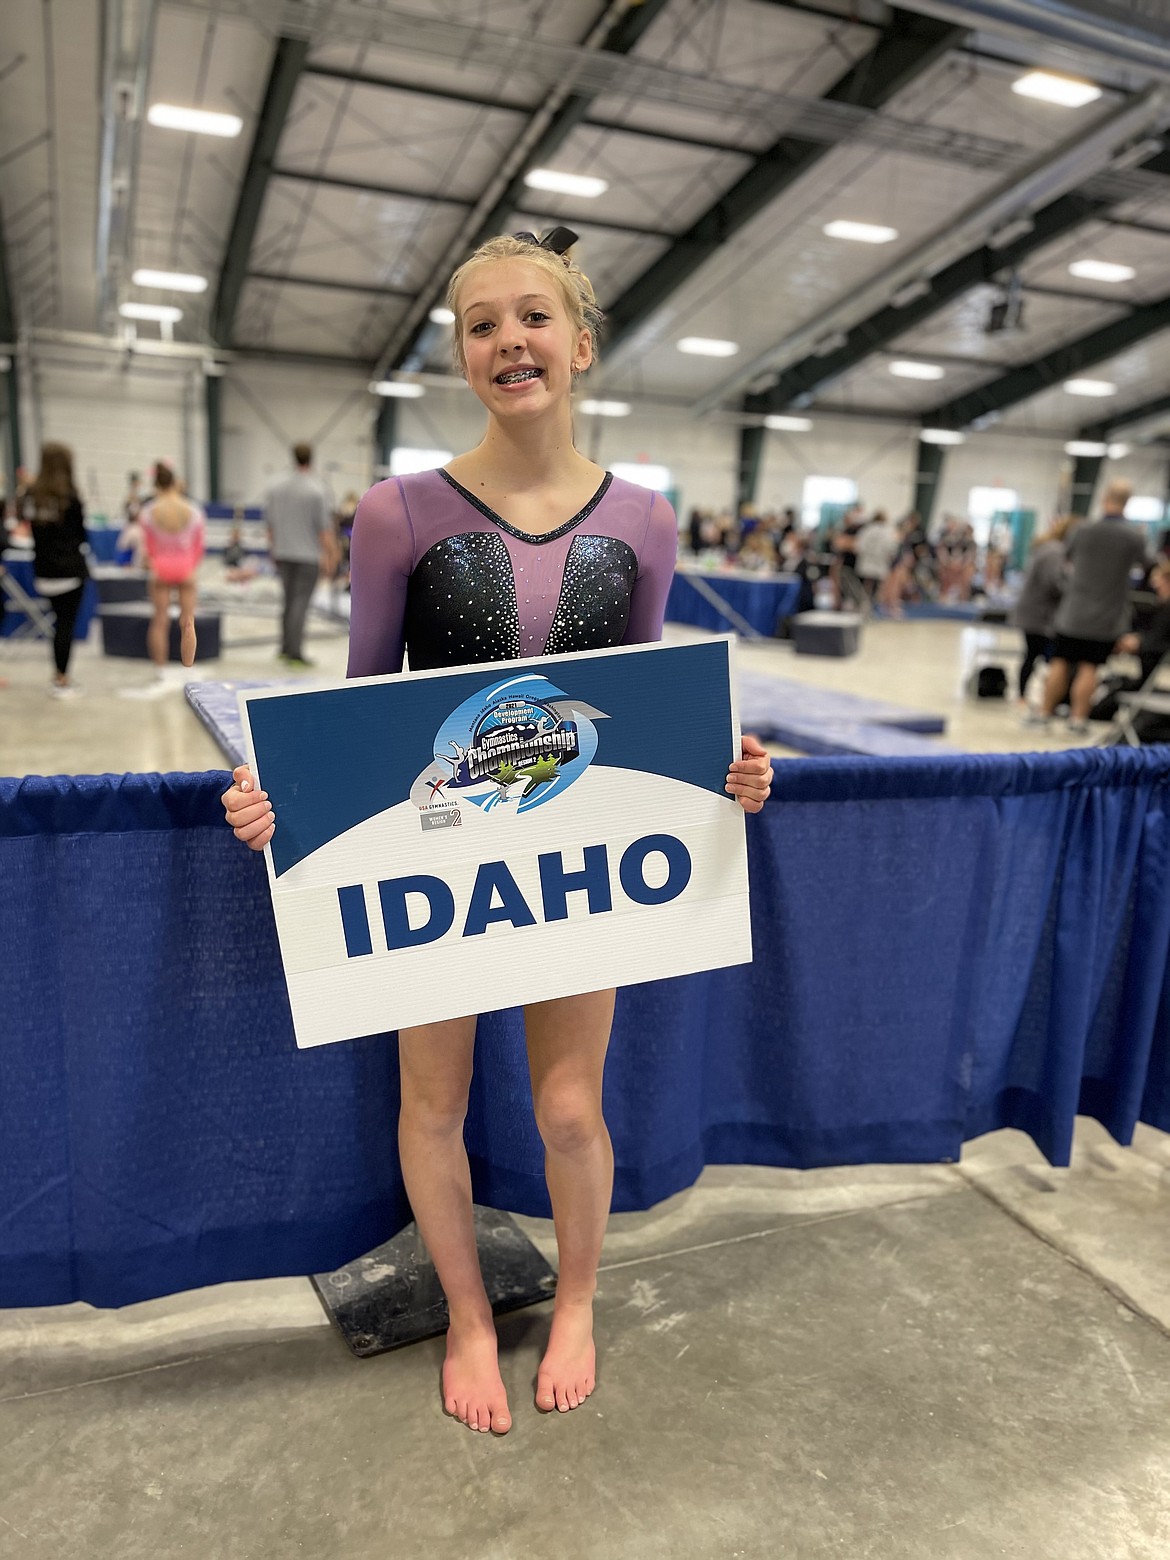 Courtesy photo
Avant Coeur Gymnastics Level 7 Neve Christensen in Helena, Mont., competing at the Region 2 championships.